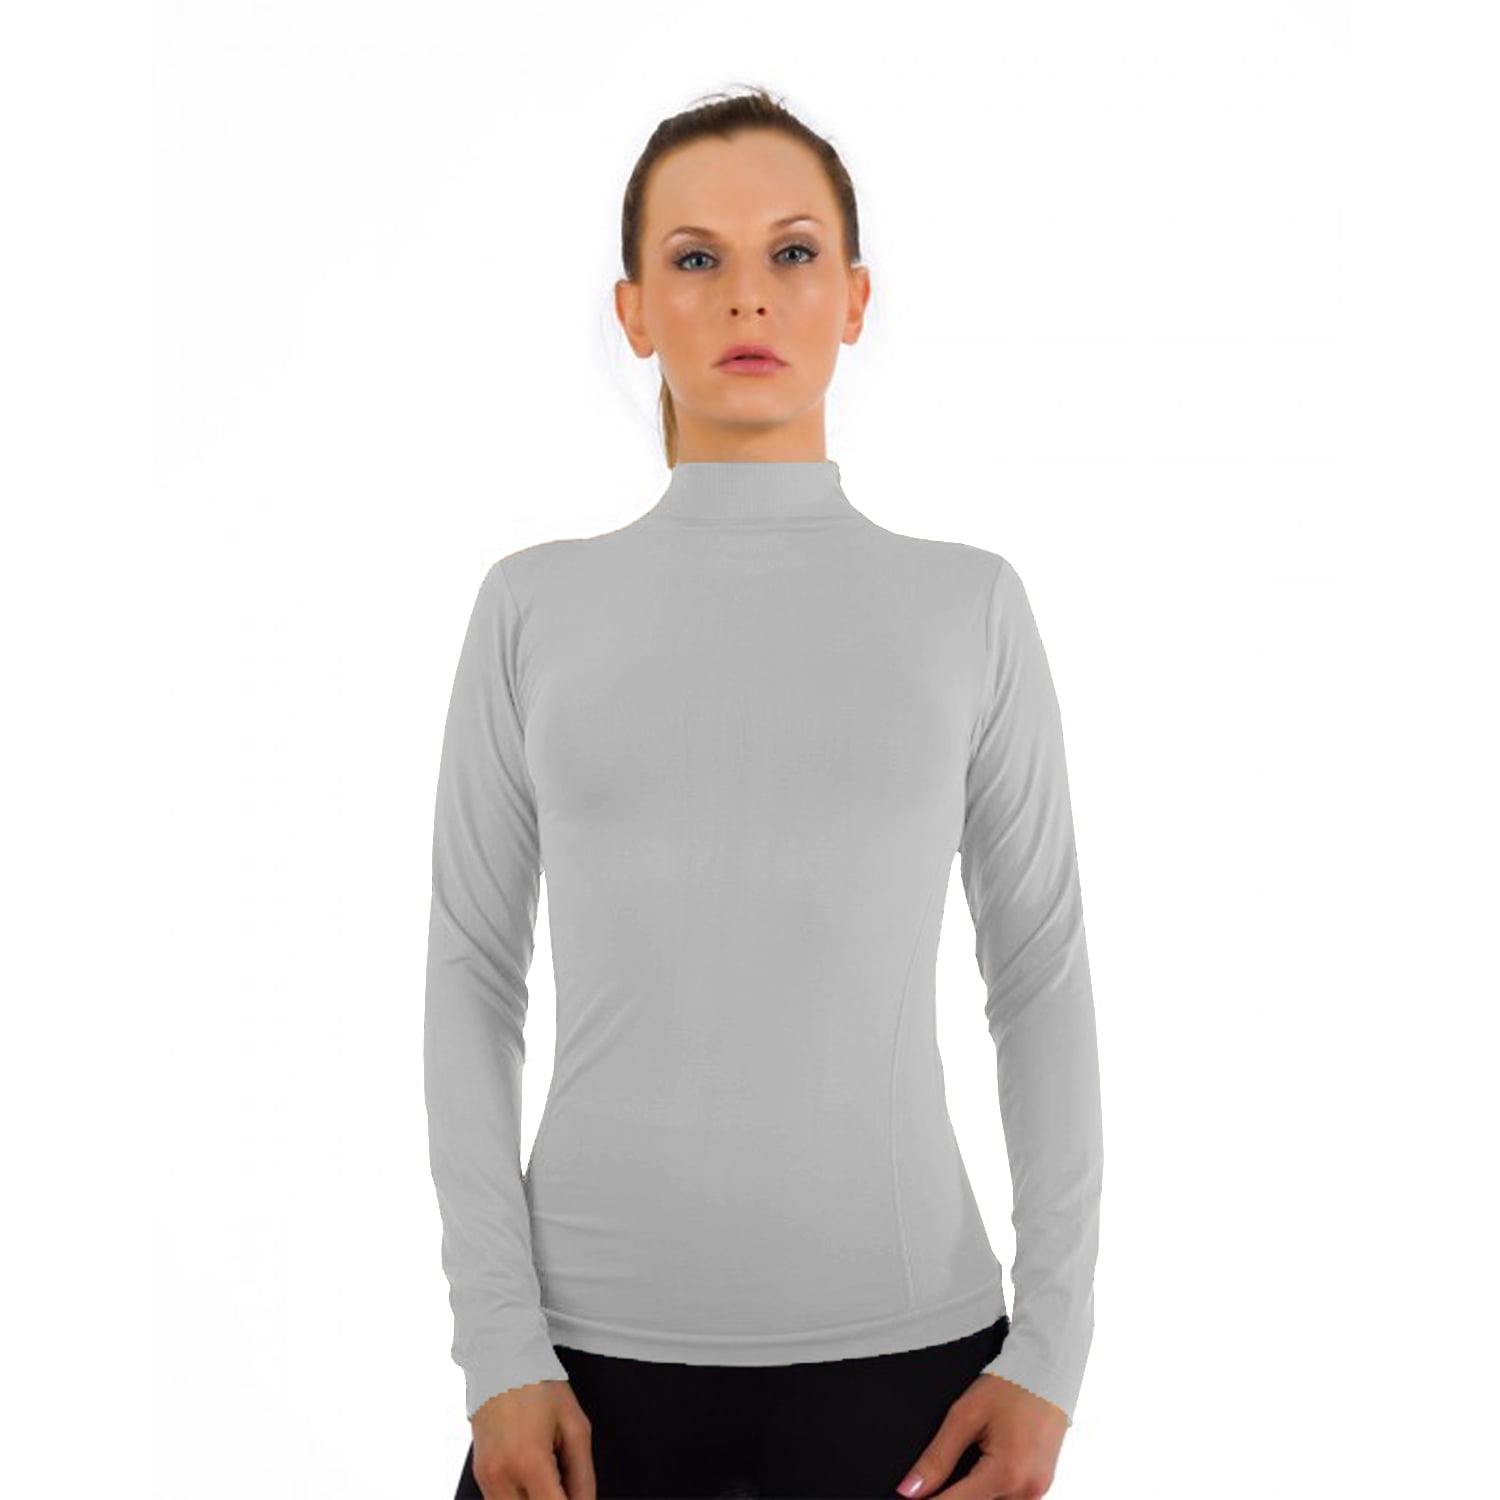 GUBUYI Womens Turtleneck Long Sleeve Thermal T-Shirts Stretchy Fitted Pullover Cotton Tops